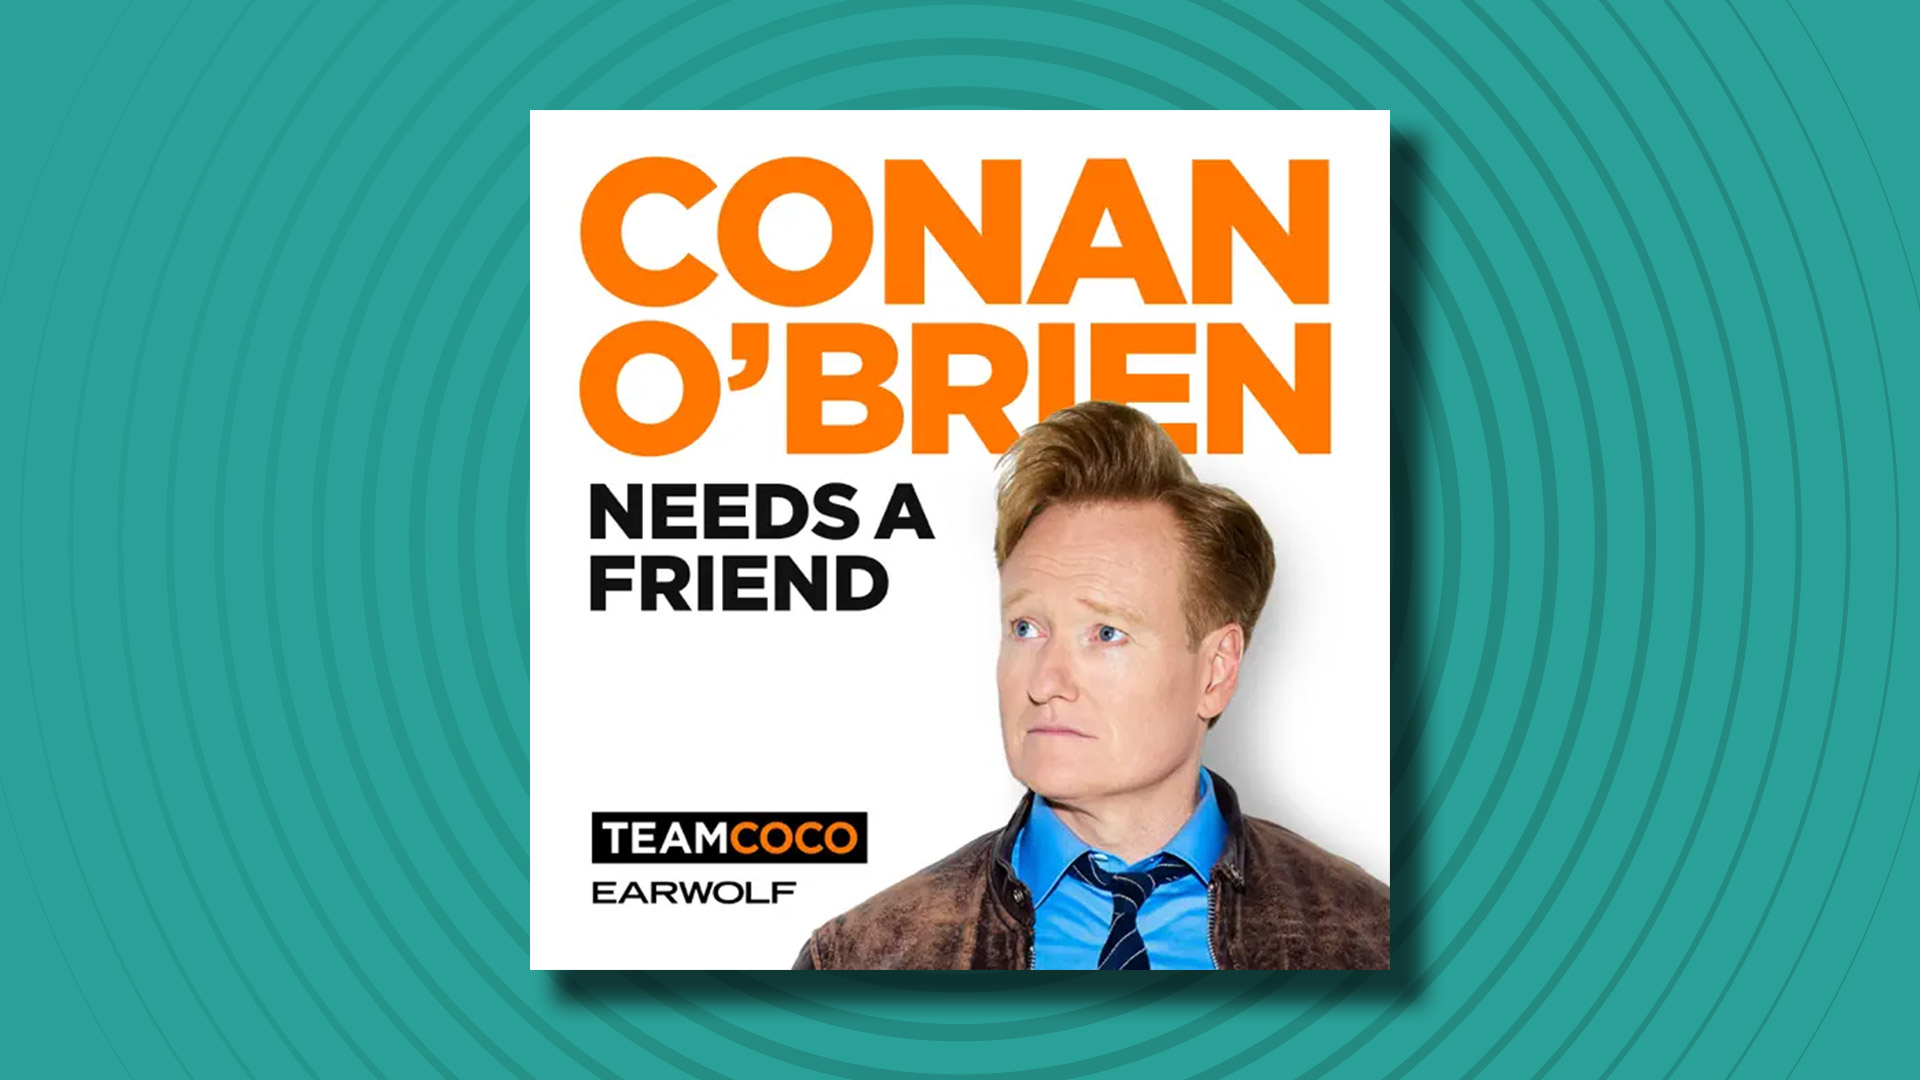 The logo of the Conan O'Brien Needs A Friend podcast on a turquoise background